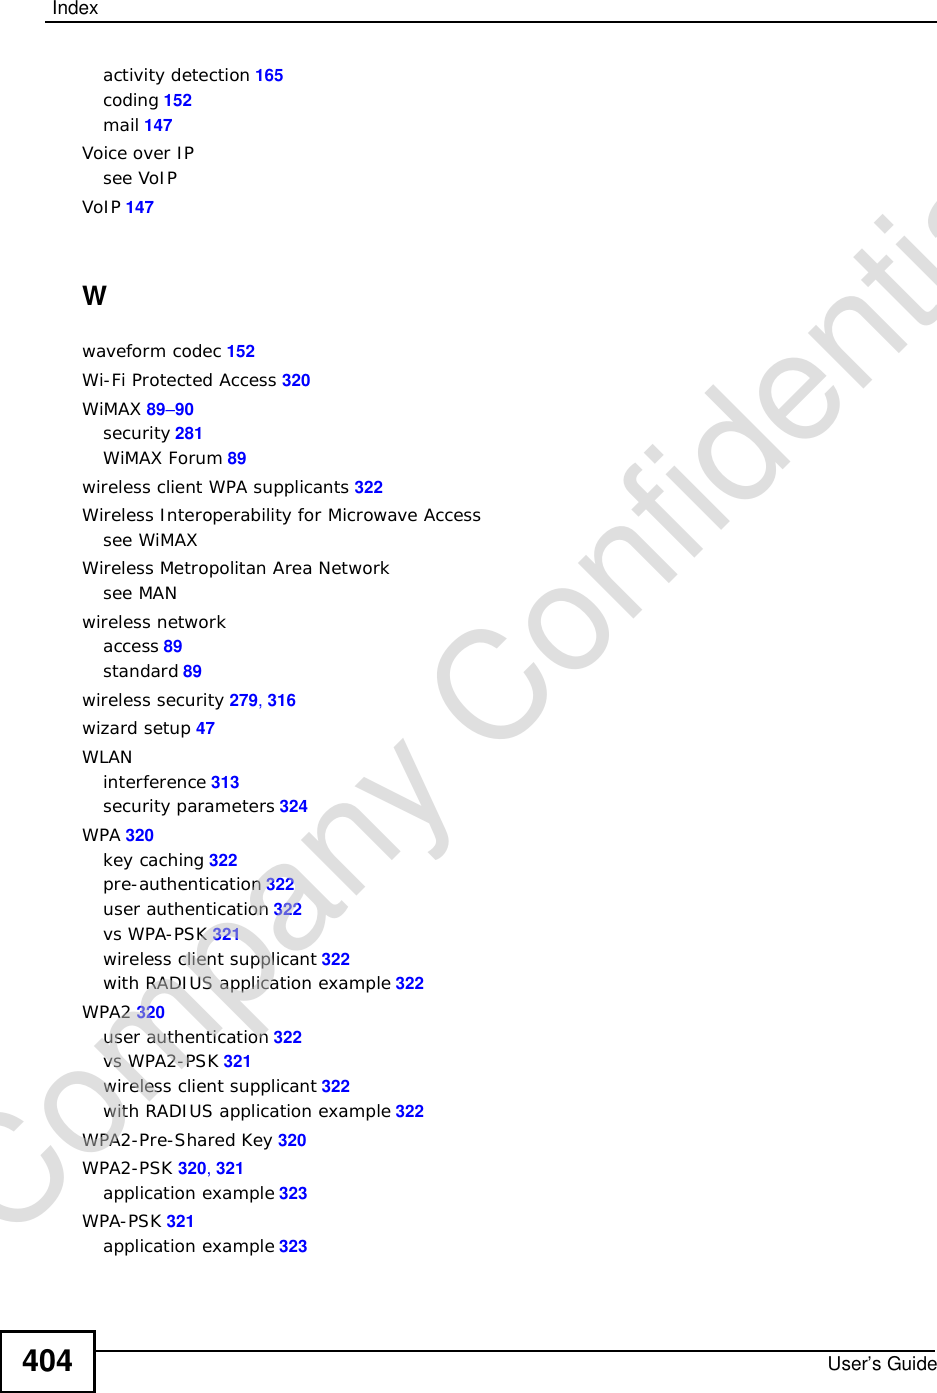 IndexUser’s Guide404activity detection 165coding 152mail 147Voice over IPsee VoIPVoIP 147Wwaveform codec 152Wi-Fi Protected Access 320WiMAX 89–90security 281WiMAX Forum 89wireless client WPA supplicants 322Wireless Interoperability for Microwave Accesssee WiMAXWireless Metropolitan Area Networksee MANwireless networkaccess 89standard 89wireless security 279,316wizard setup 47WLANinterference 313security parameters 324WPA 320key caching 322pre-authentication 322user authentication 322vs WPA-PSK 321wireless client supplicant 322with RADIUS application example 322WPA2 320user authentication 322vs WPA2-PSK 321wireless client supplicant 322with RADIUS application example 322WPA2-Pre-Shared Key 320WPA2-PSK 320,321application example 323WPA-PSK 321application example 323Company Confidential